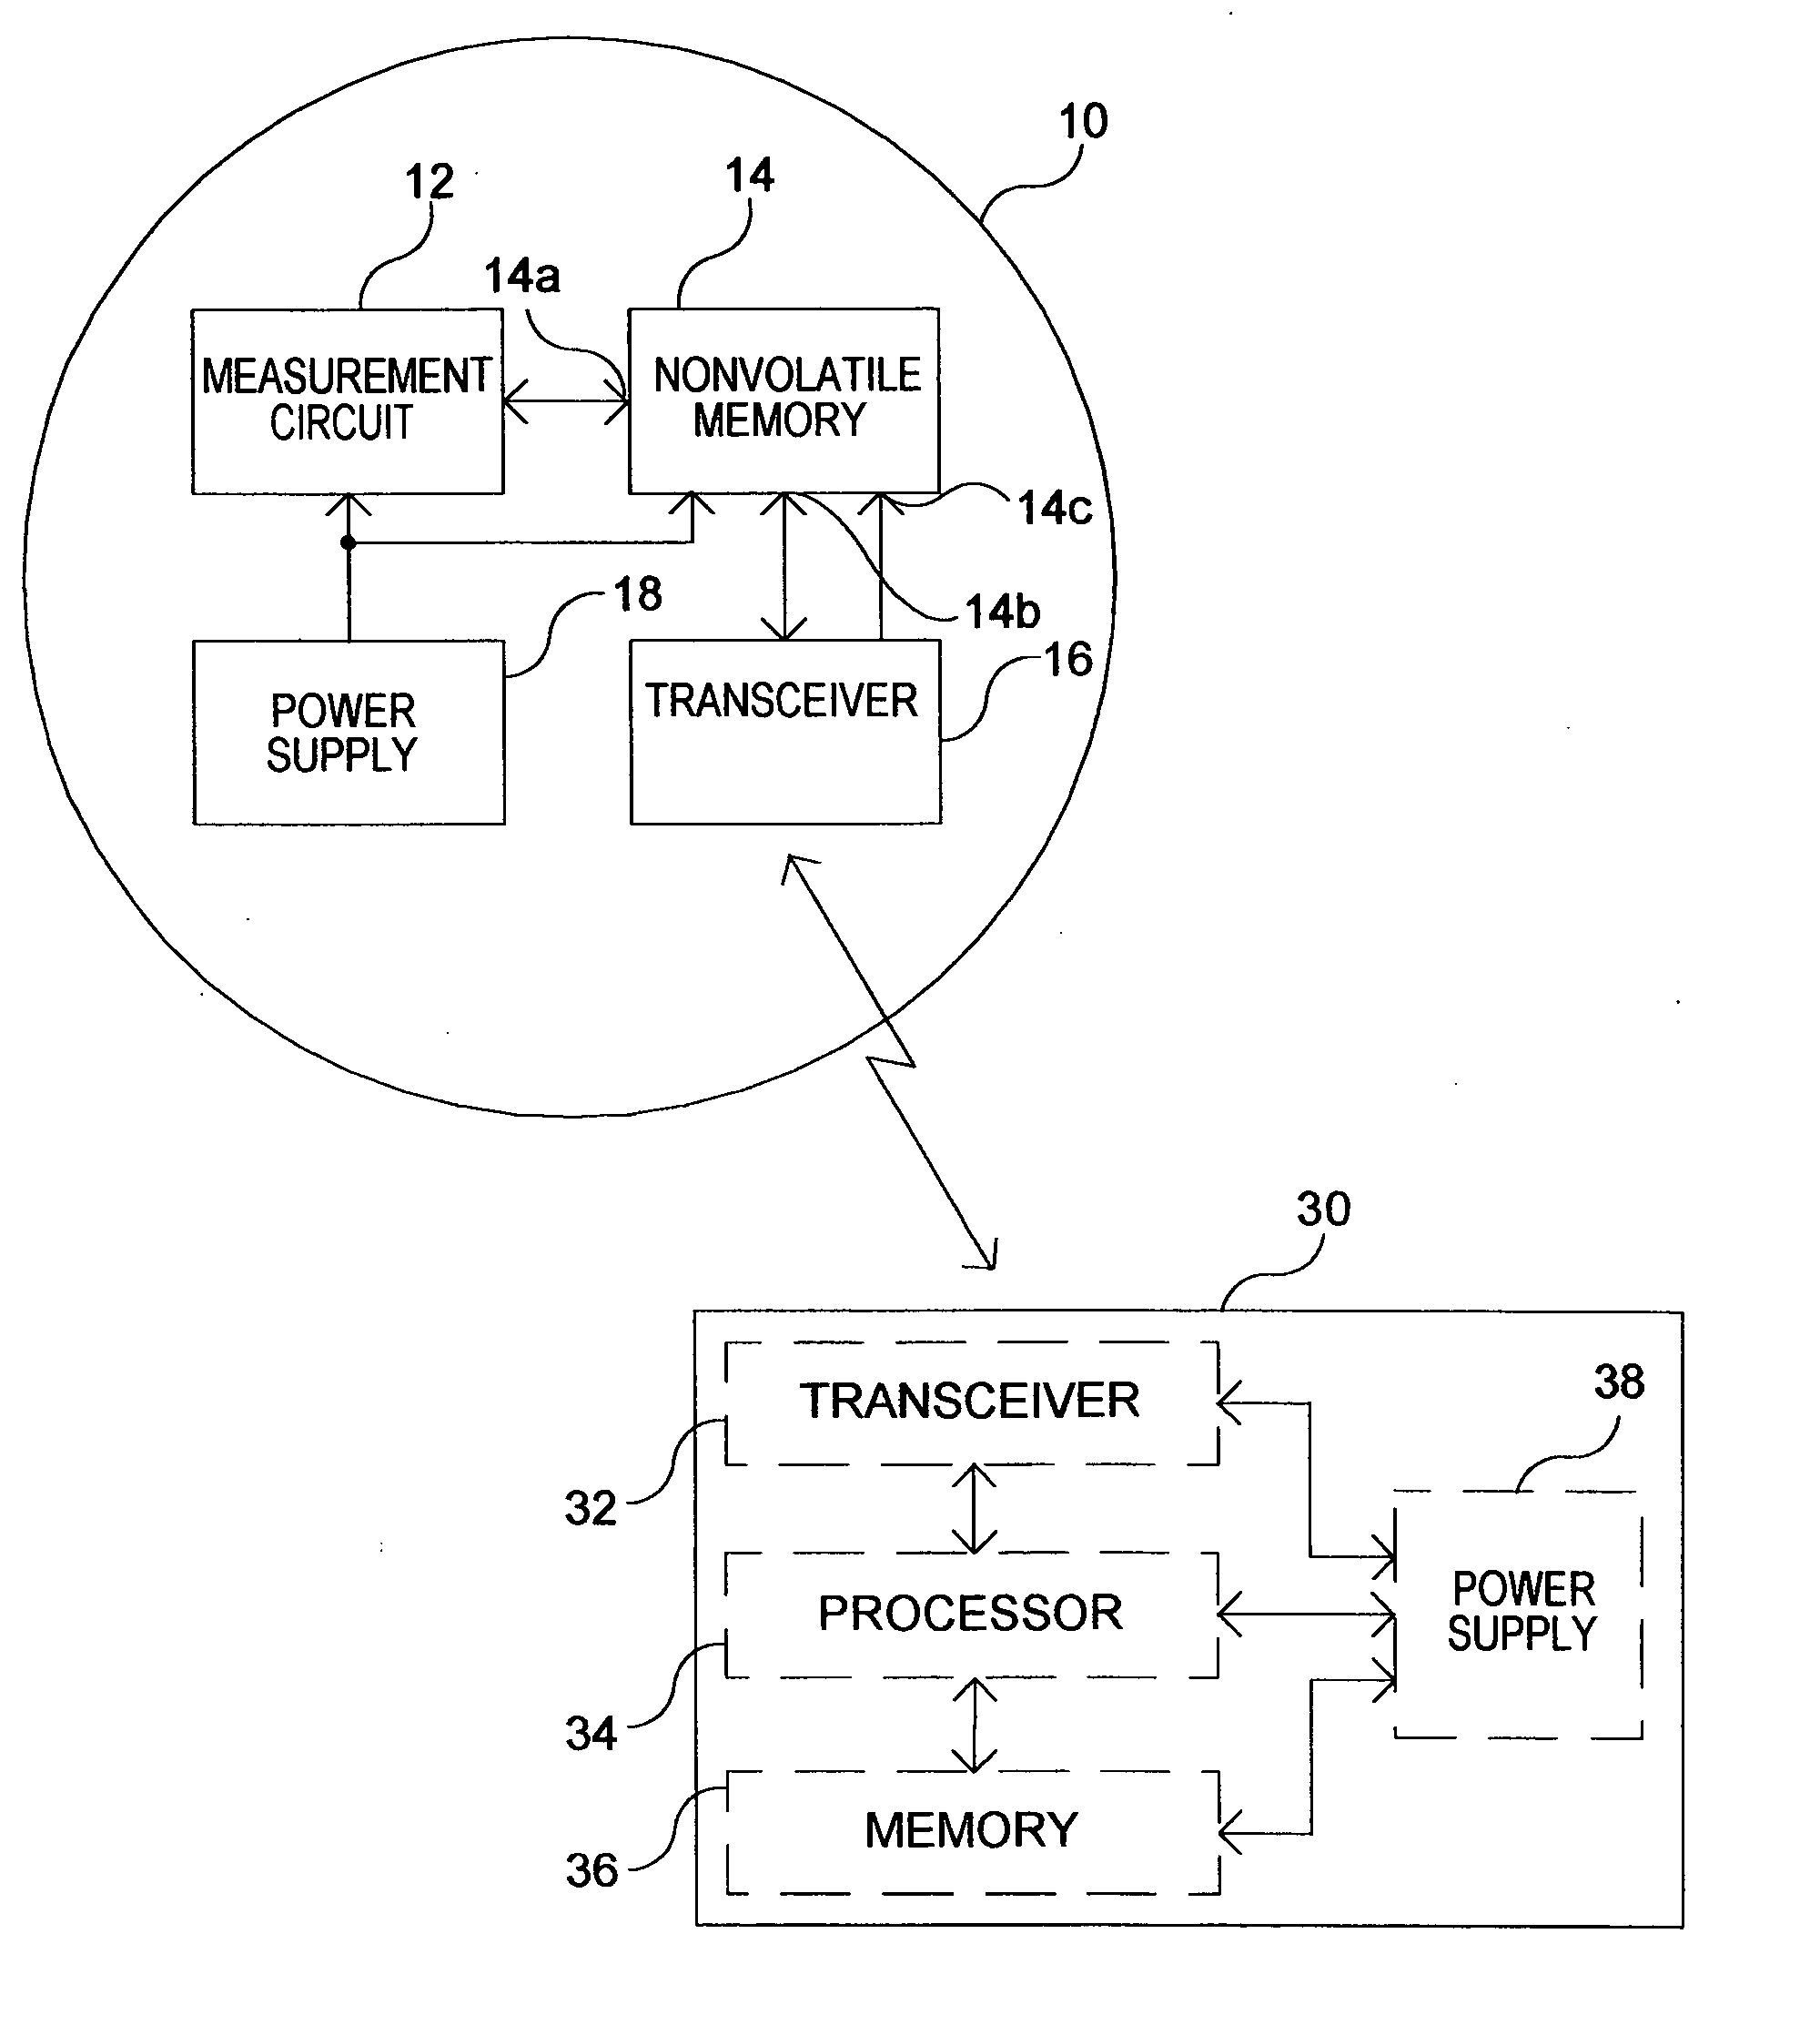 Utility meter with external signal-powered transceiver